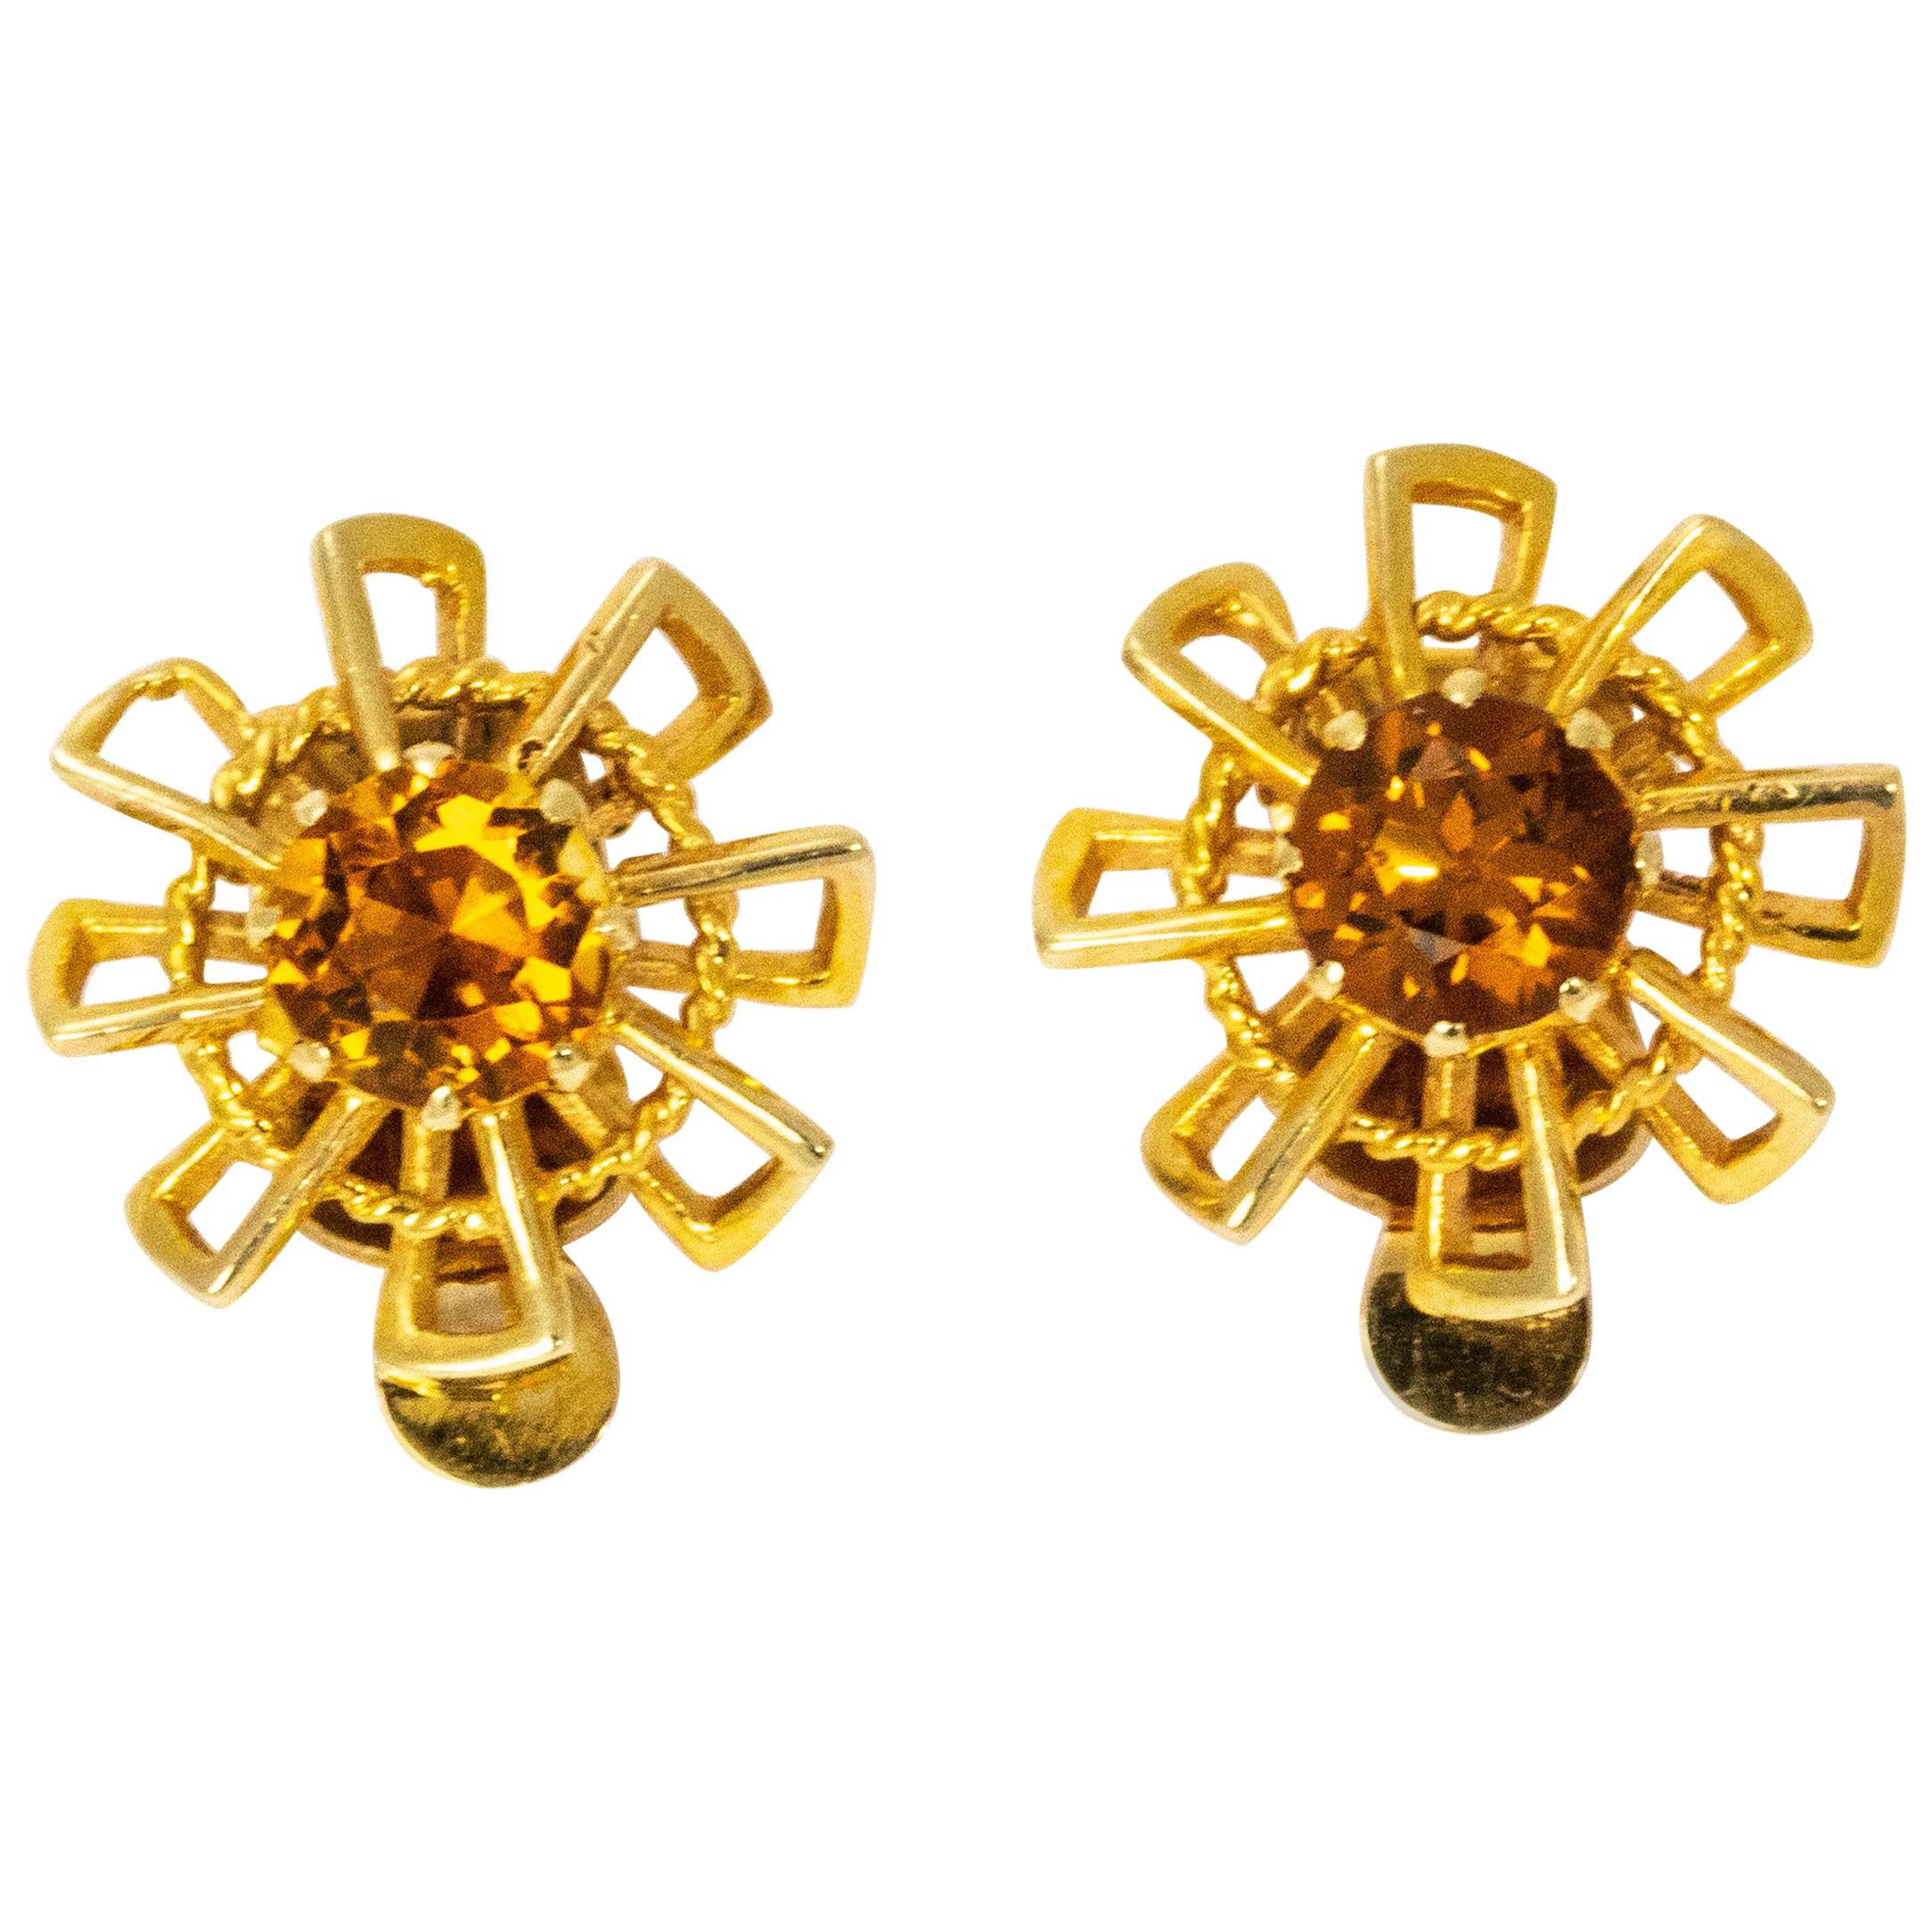 Vintage 1940s Crop and Farr Topaz 9 Carat Gold Earrings